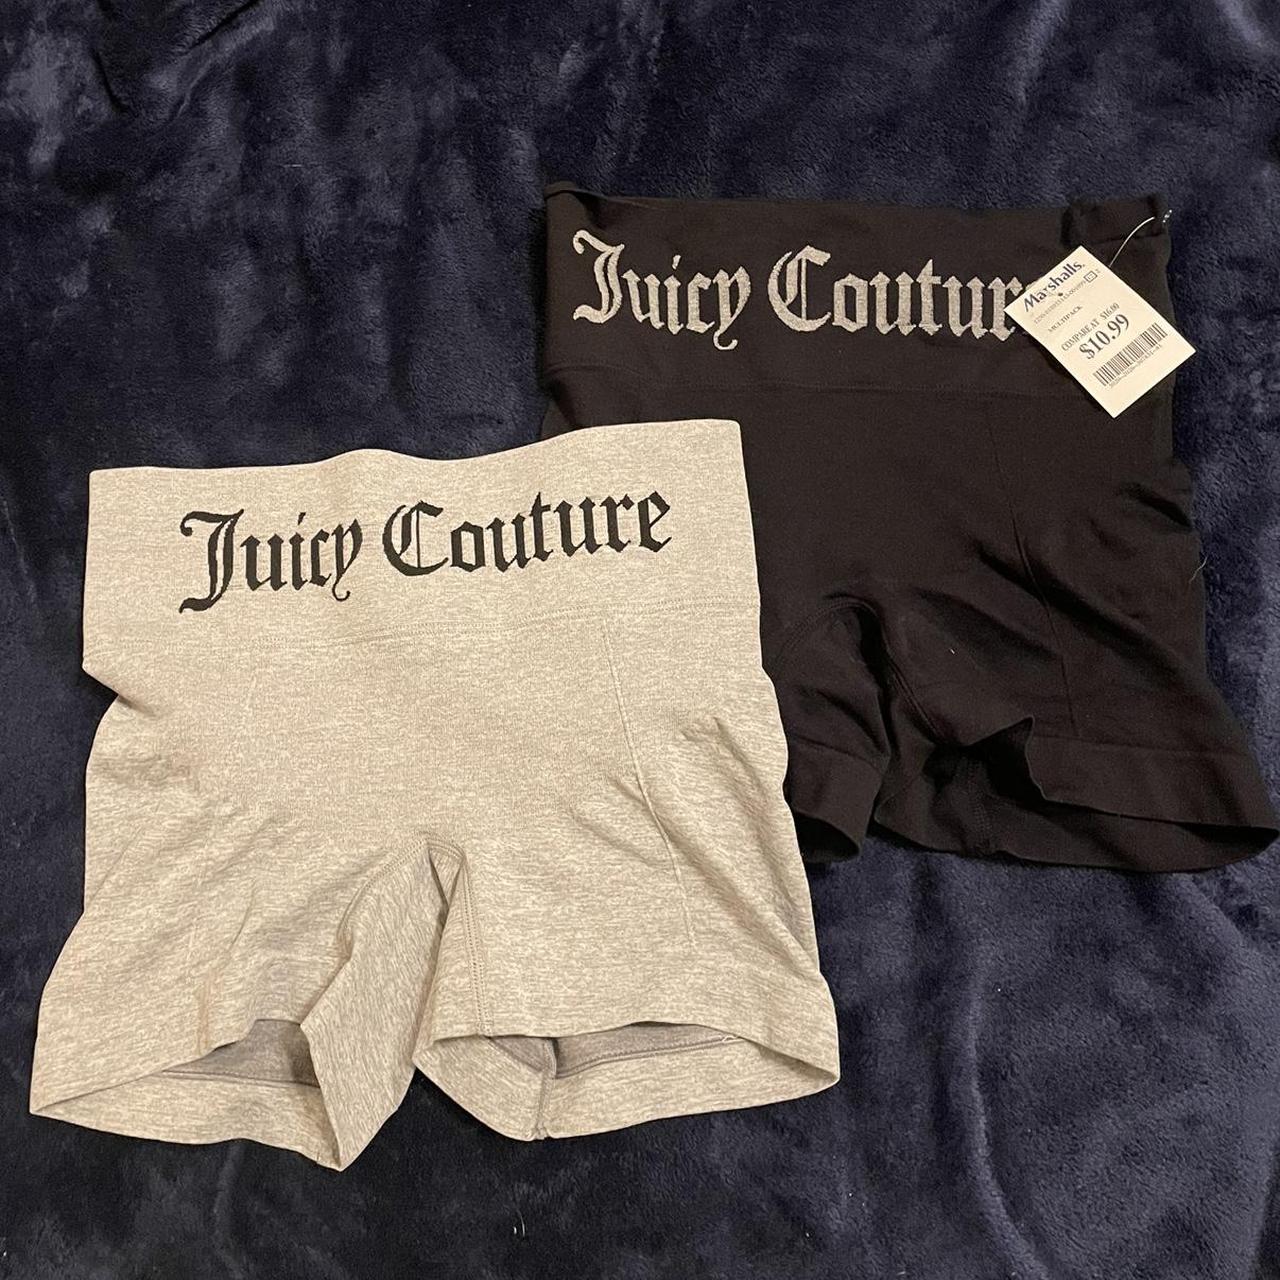 Juicy Couture Women's Black and Grey Shapewear | Depop